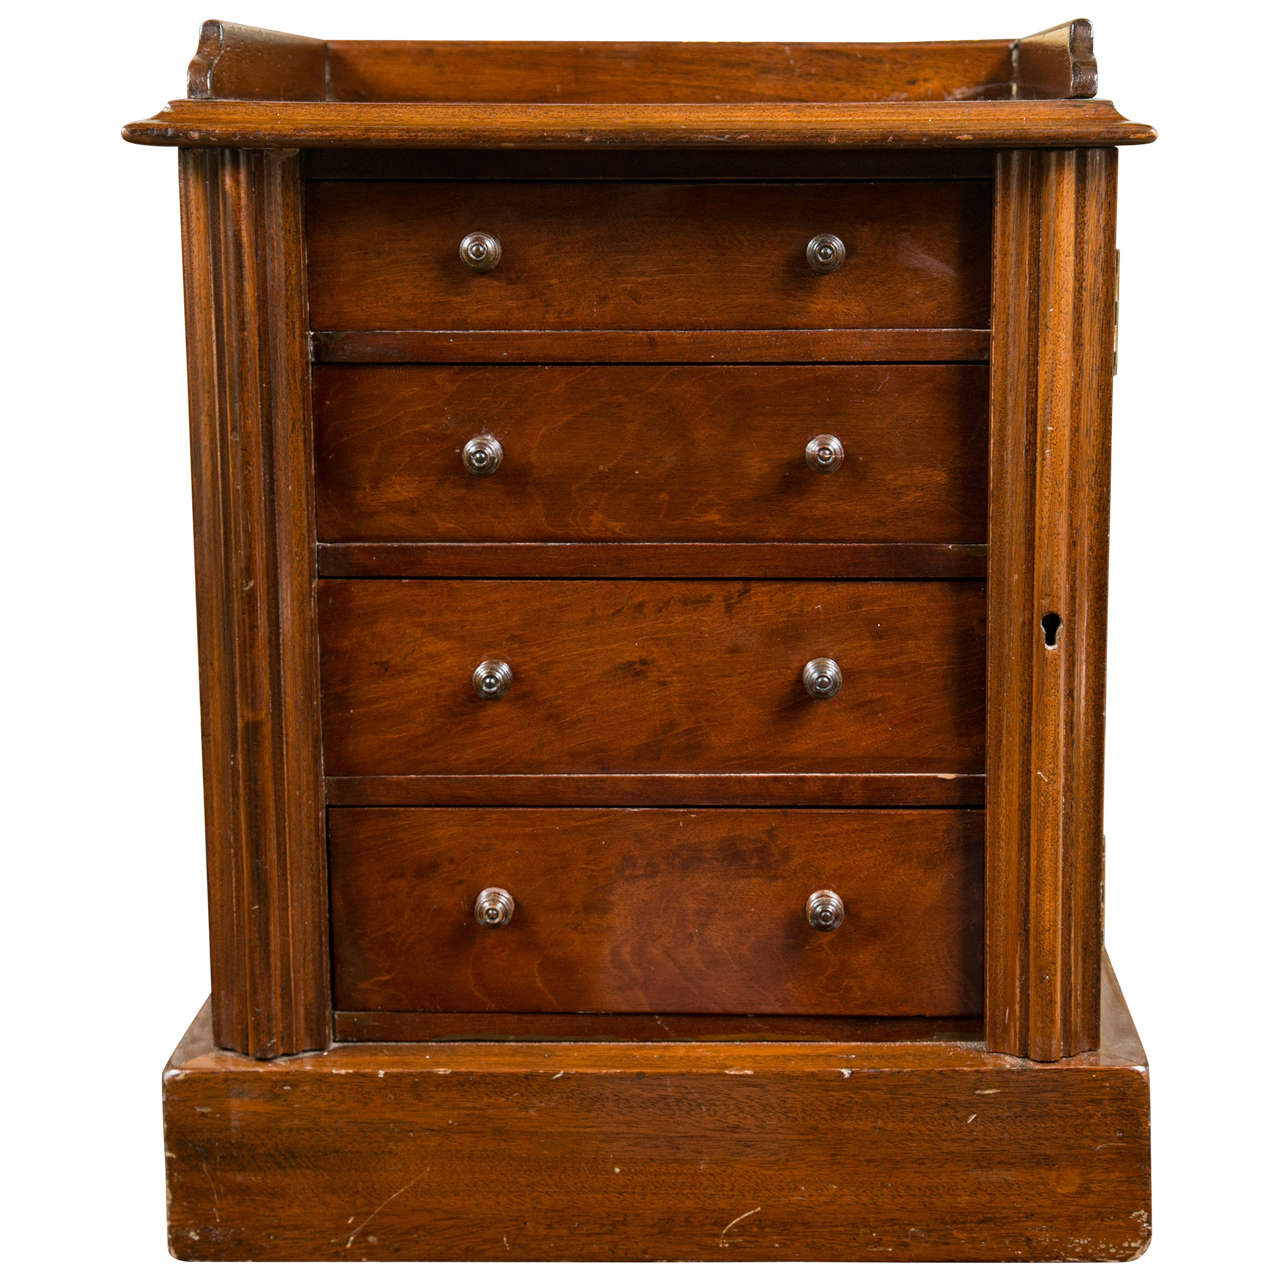 Period William IV Miniature Side Lock Chest For Sale